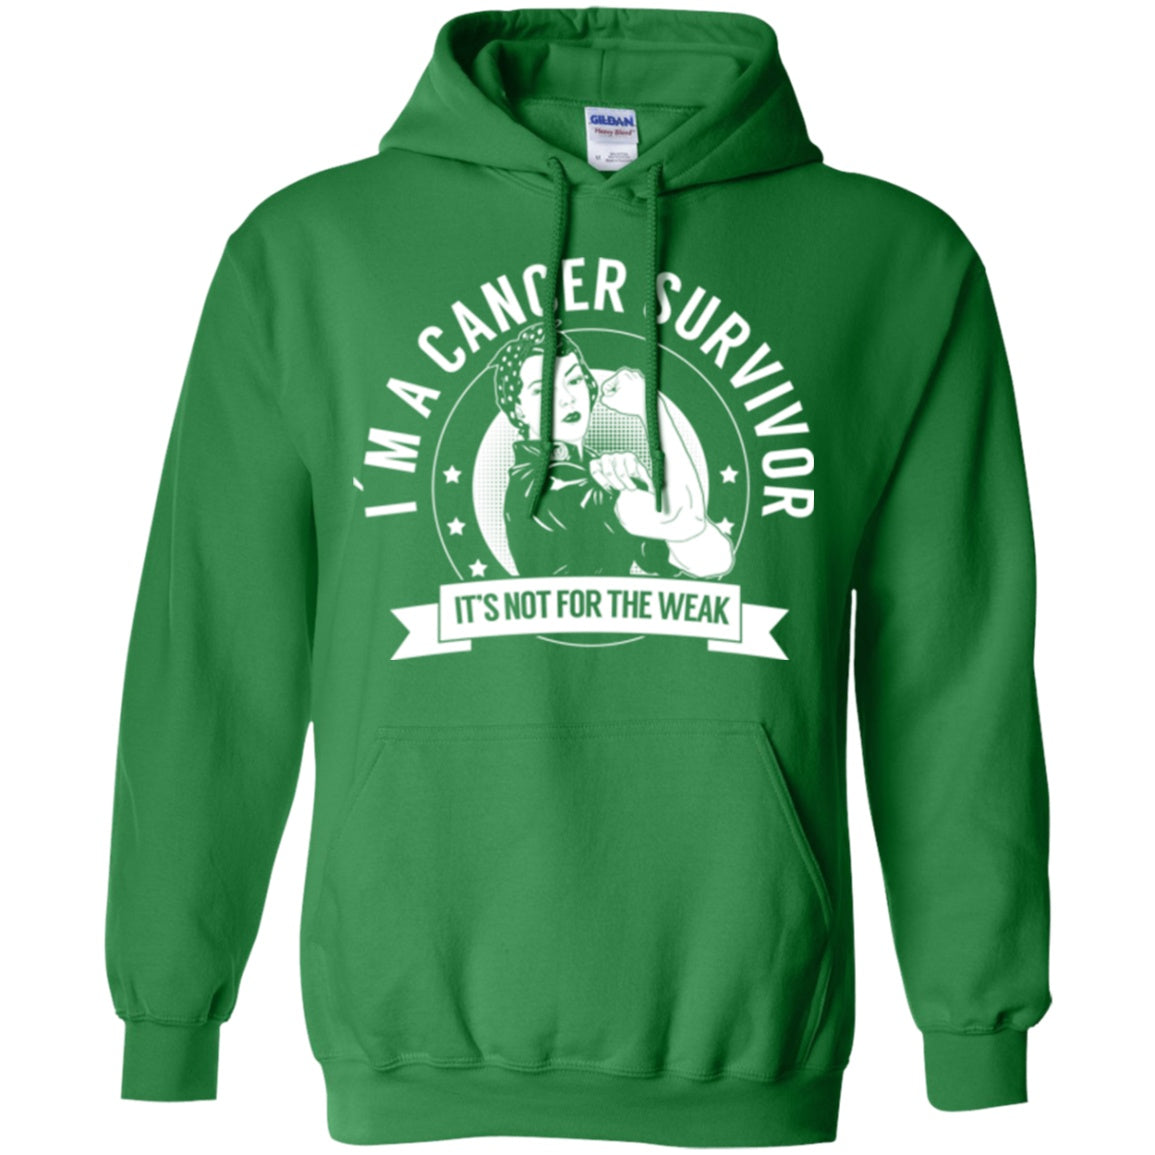 Cancer Survivor Not For The Weak Pullover Hoodie 8 oz. - The Unchargeables